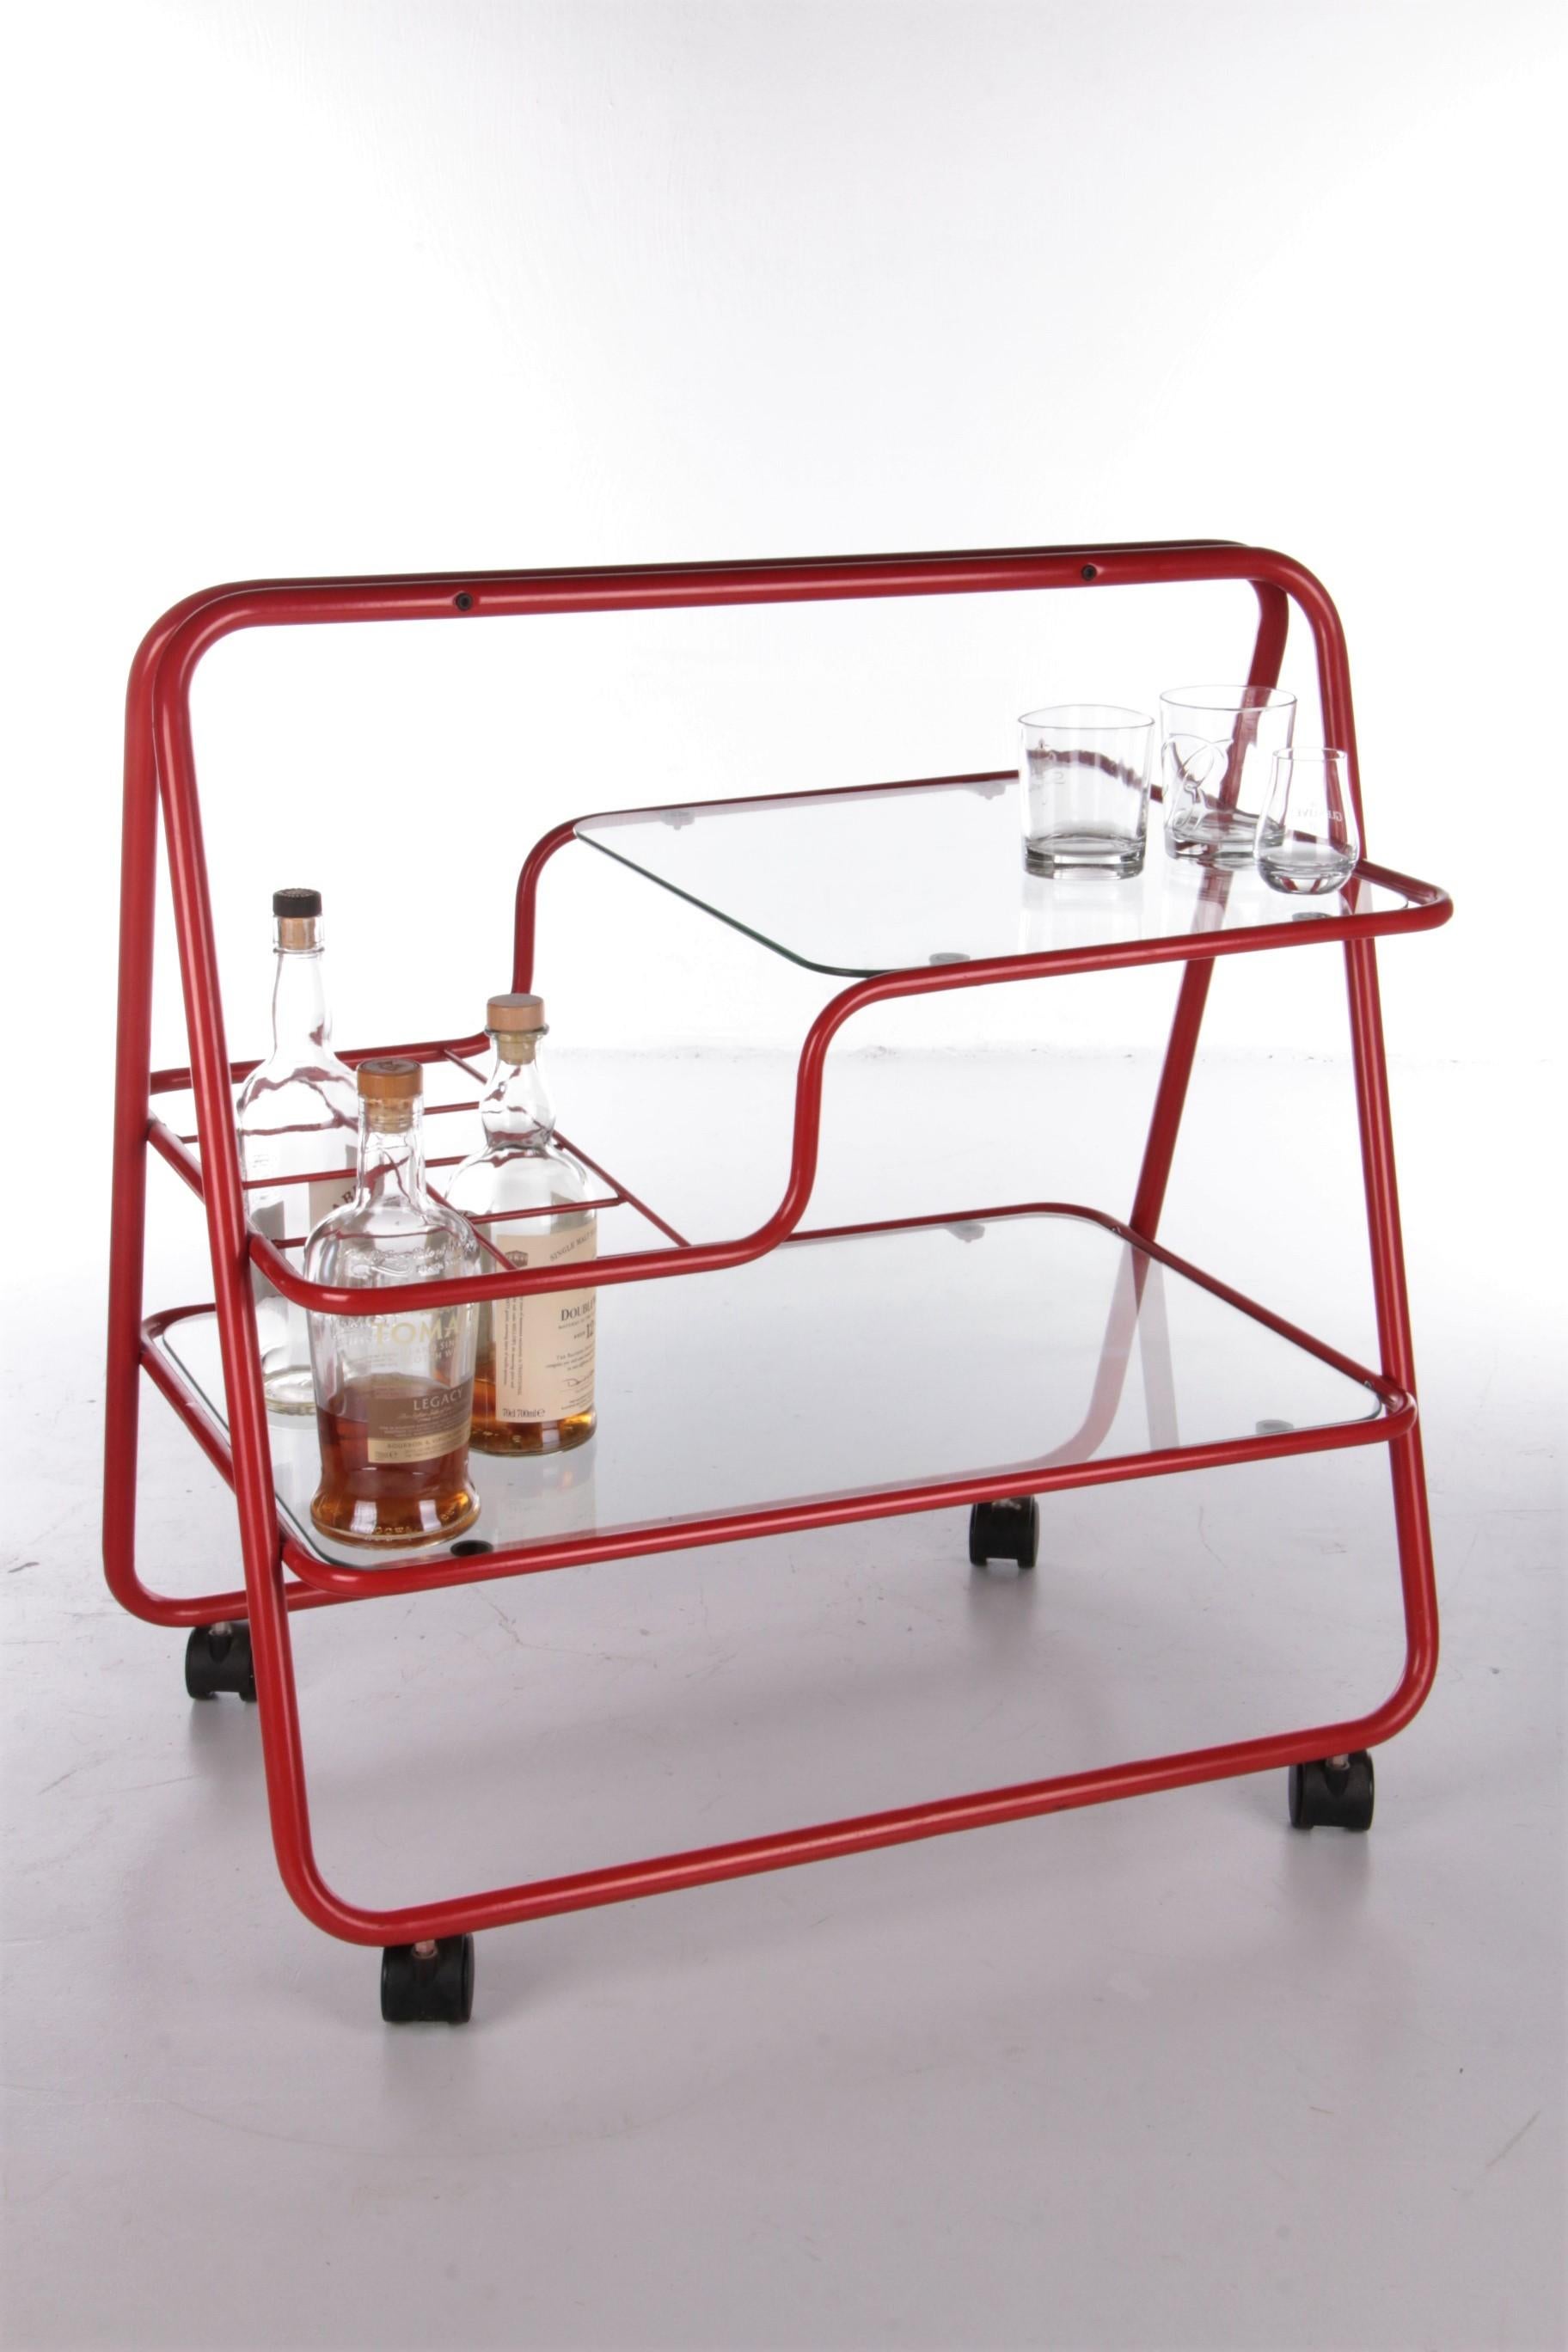 Intage red metal unique trolley or bar cart, 1970s

This is a beautiful trolley from the 1970s.

The bottom leaf is made of glass and the top leaf is also glass, the frame is made of beautiful red and metal. On the second floor there is also a